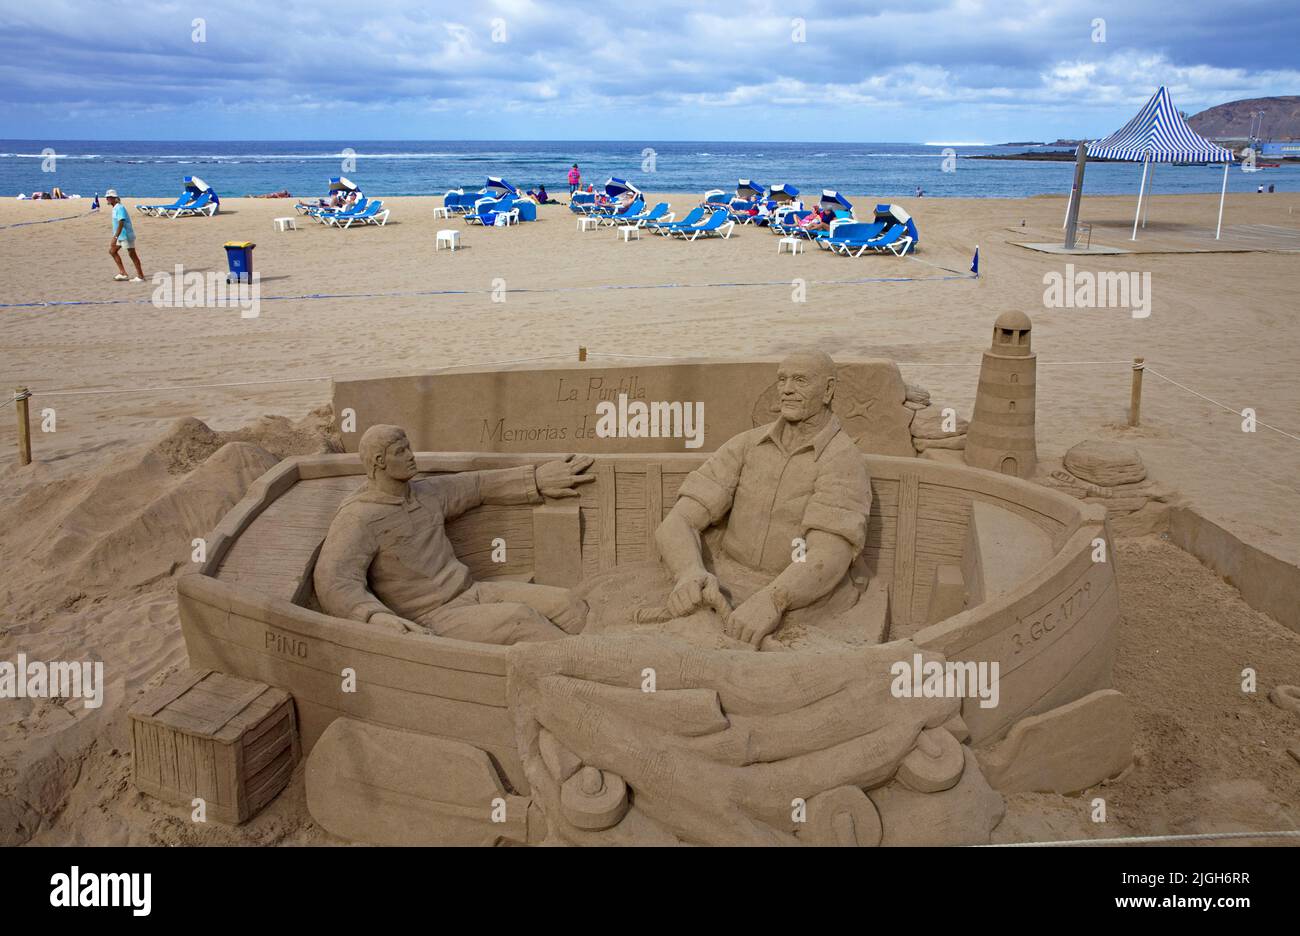 Sand art, fishermen in a fishing boat made with sand, Playa de las Canteras, town beach of Las Palmas, Grand Canary, Canary islands, Spain, Europe Stock Photo